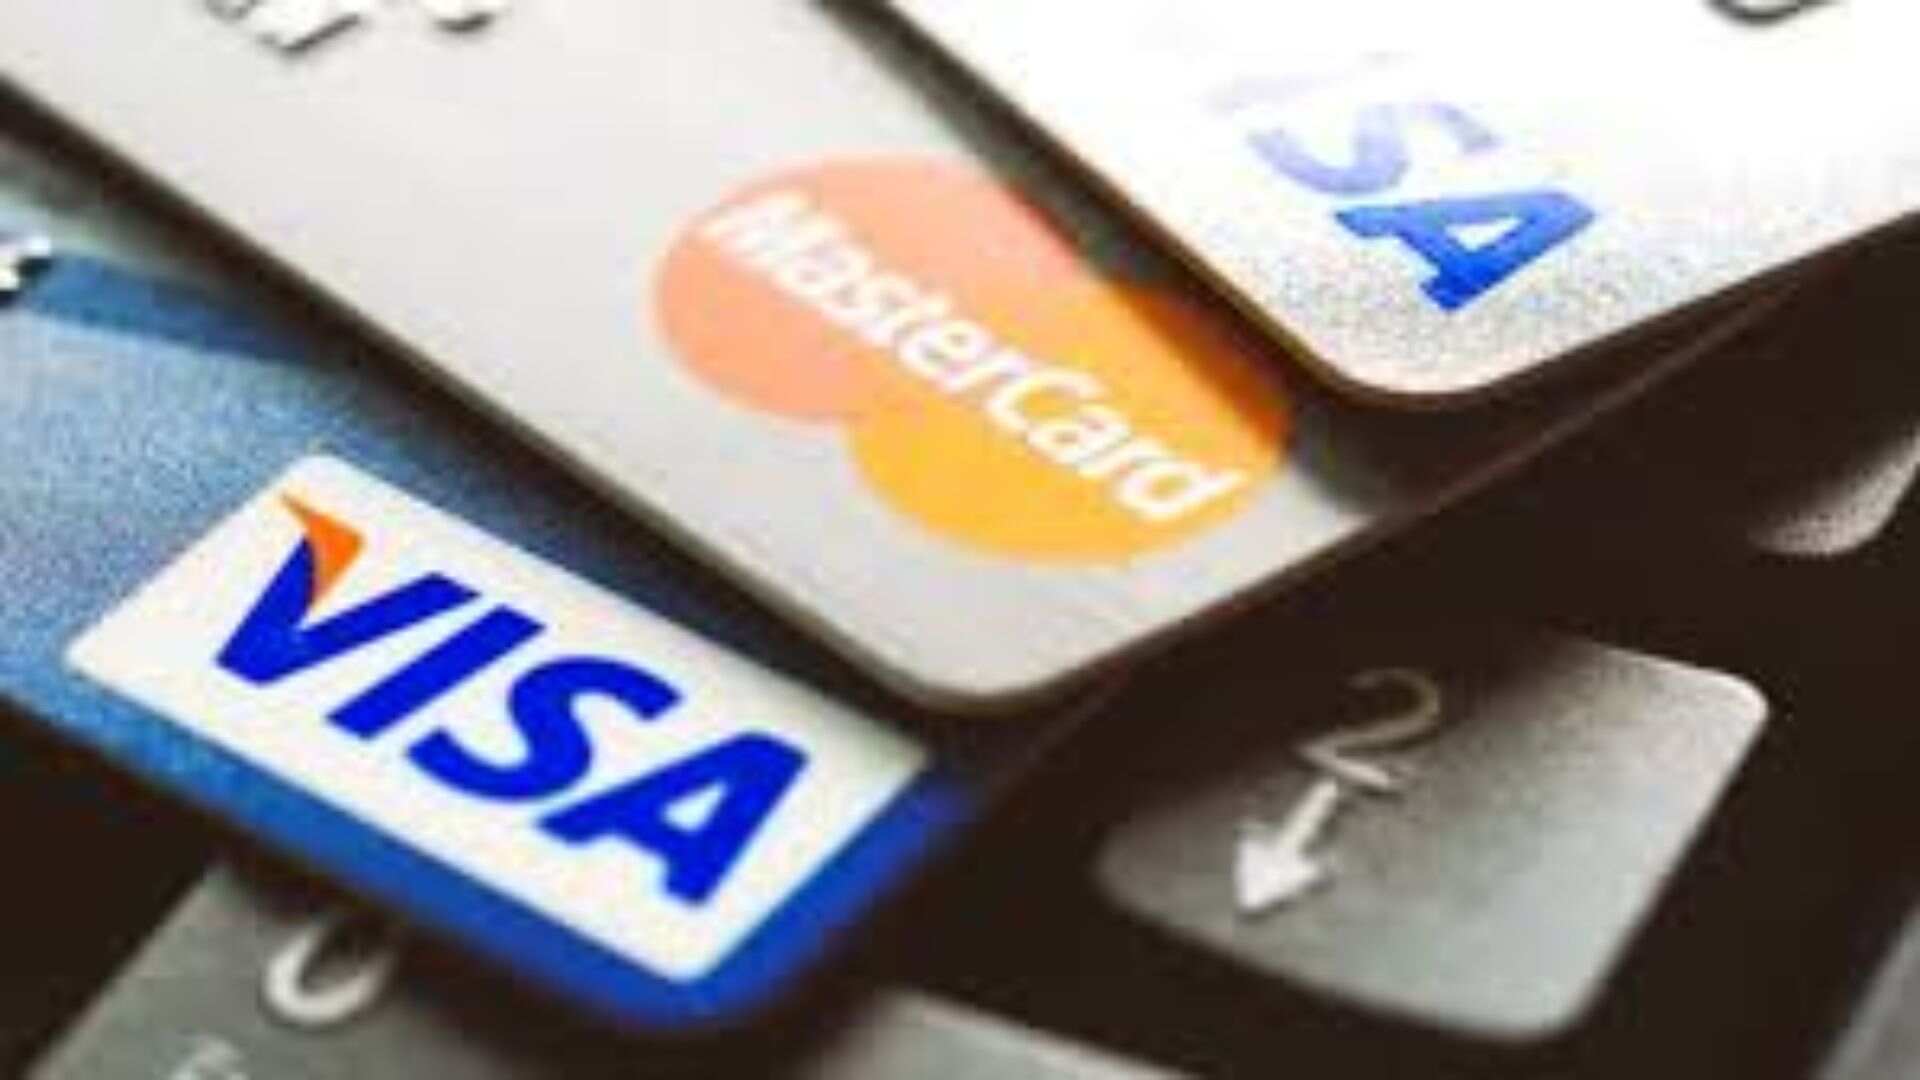 Credit Cards Payment Via PhonePe To Be Halted After June 30 (Representative Image)